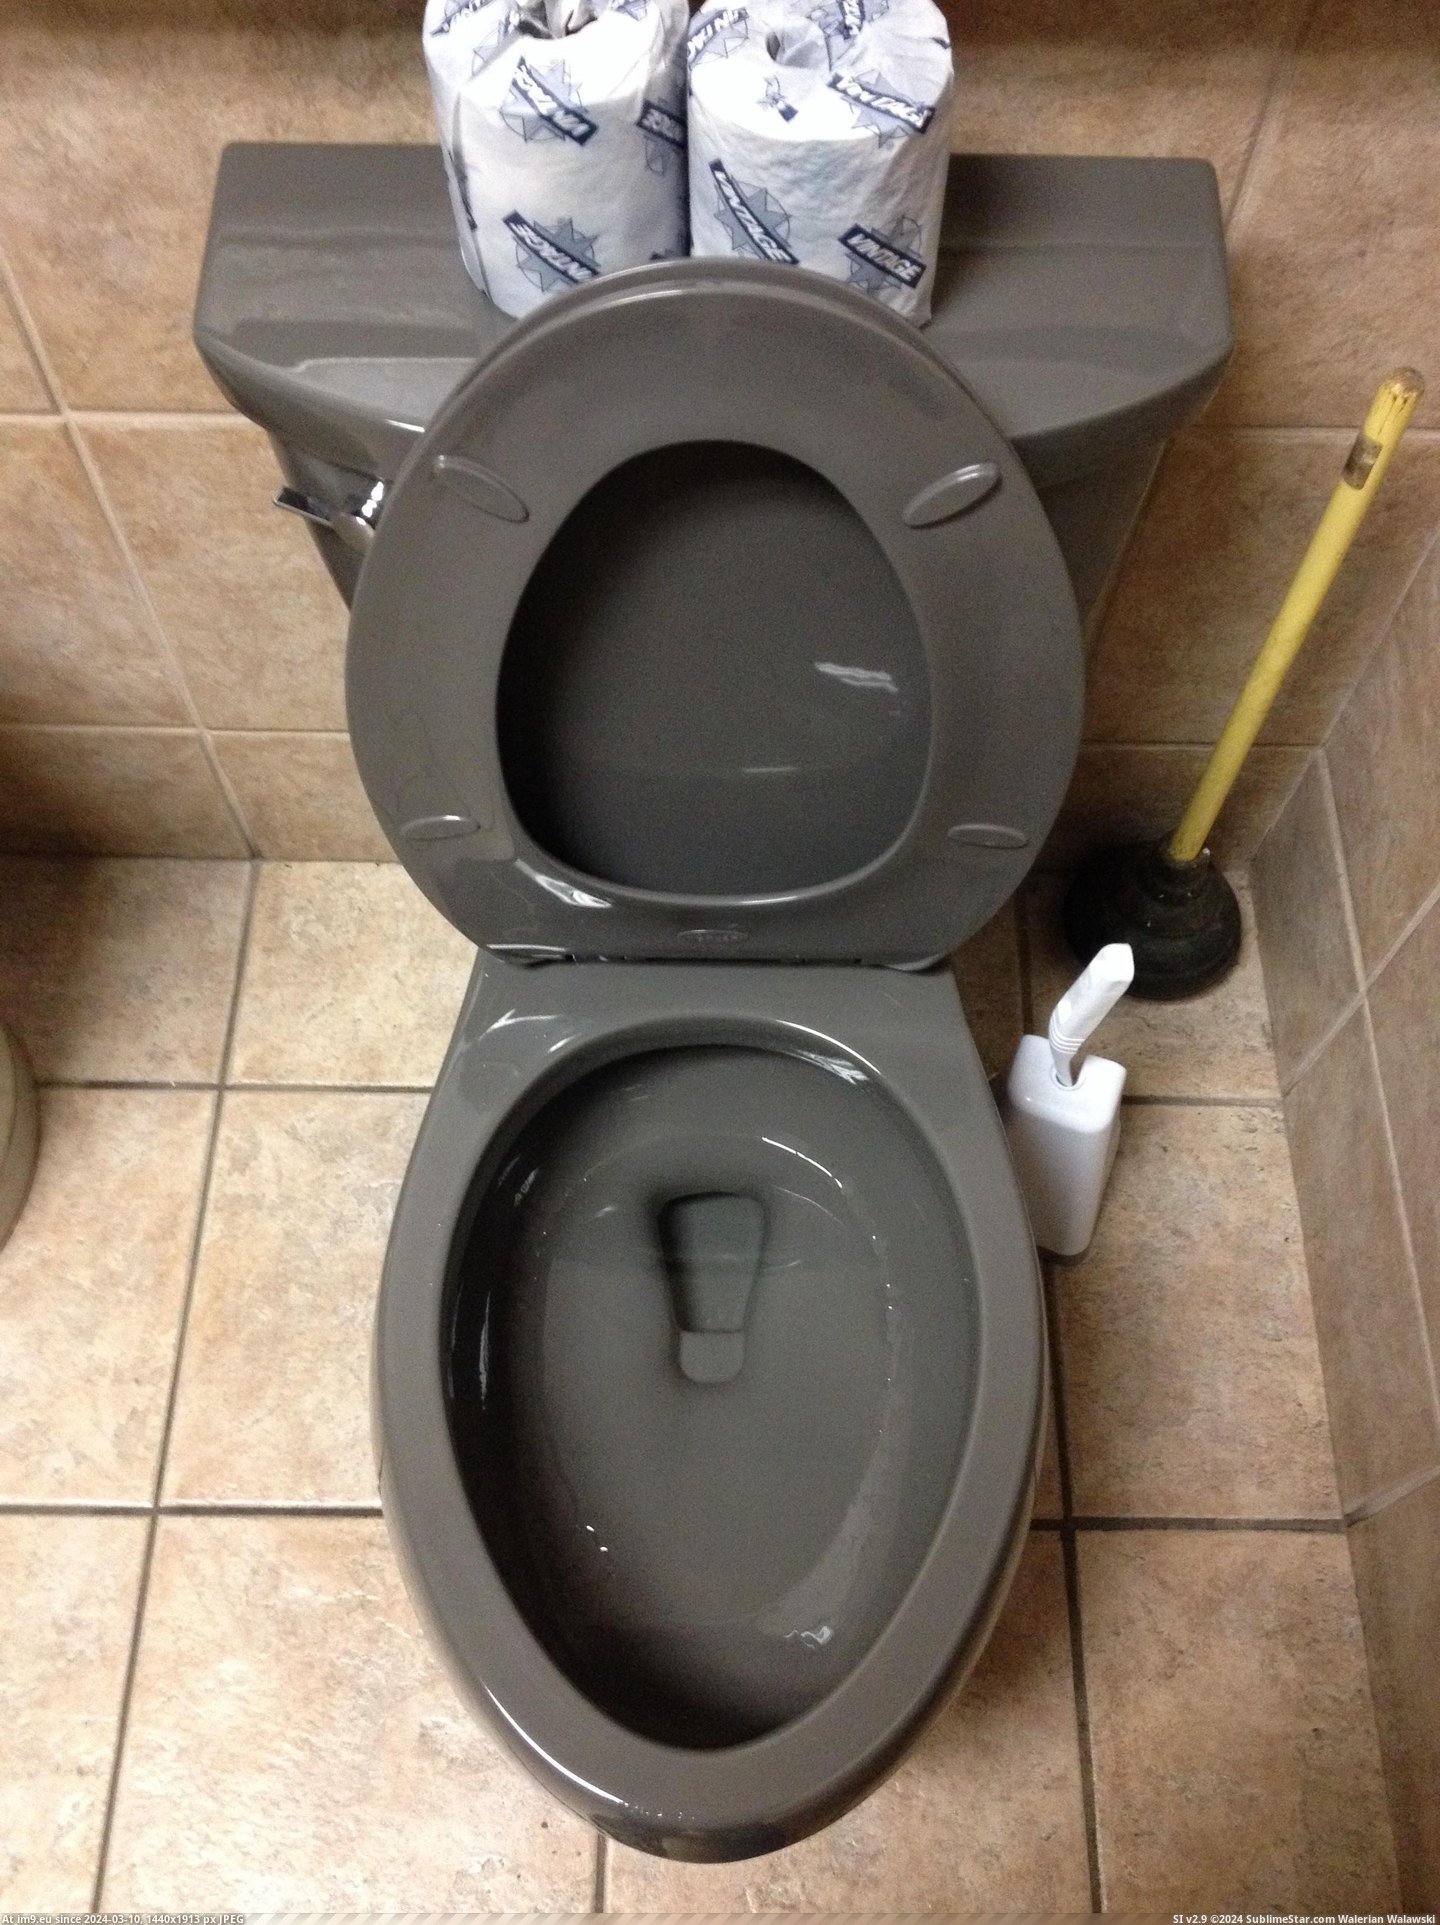 #Black #White #Toilet #Gray #Urinal #All #Bathroom [Mildlyinteresting] The toilet and urinal in the bathroom were all gray rather than just white or white and black 2 Pic. (Obraz z album My r/MILDLYINTERESTING favs))